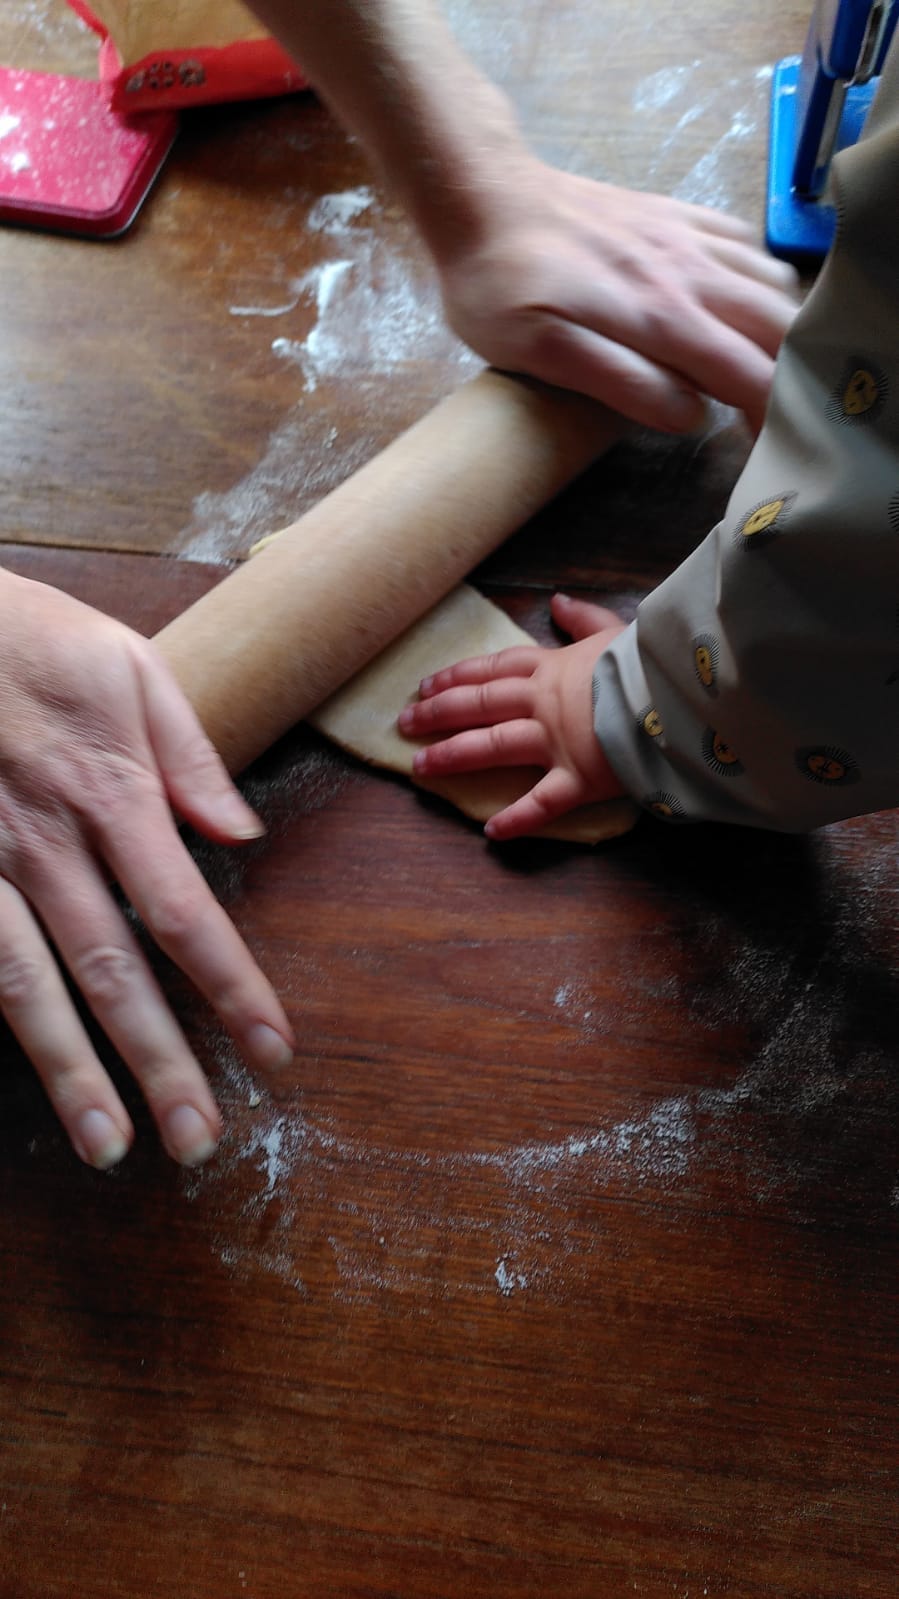 An action shot of Kate's white hands putting pressure on a rolling pin, while a toddler's little white hands are touching the yellow dough, helping out. The work surface is a wooden table with white flour dusted haphazardly. 